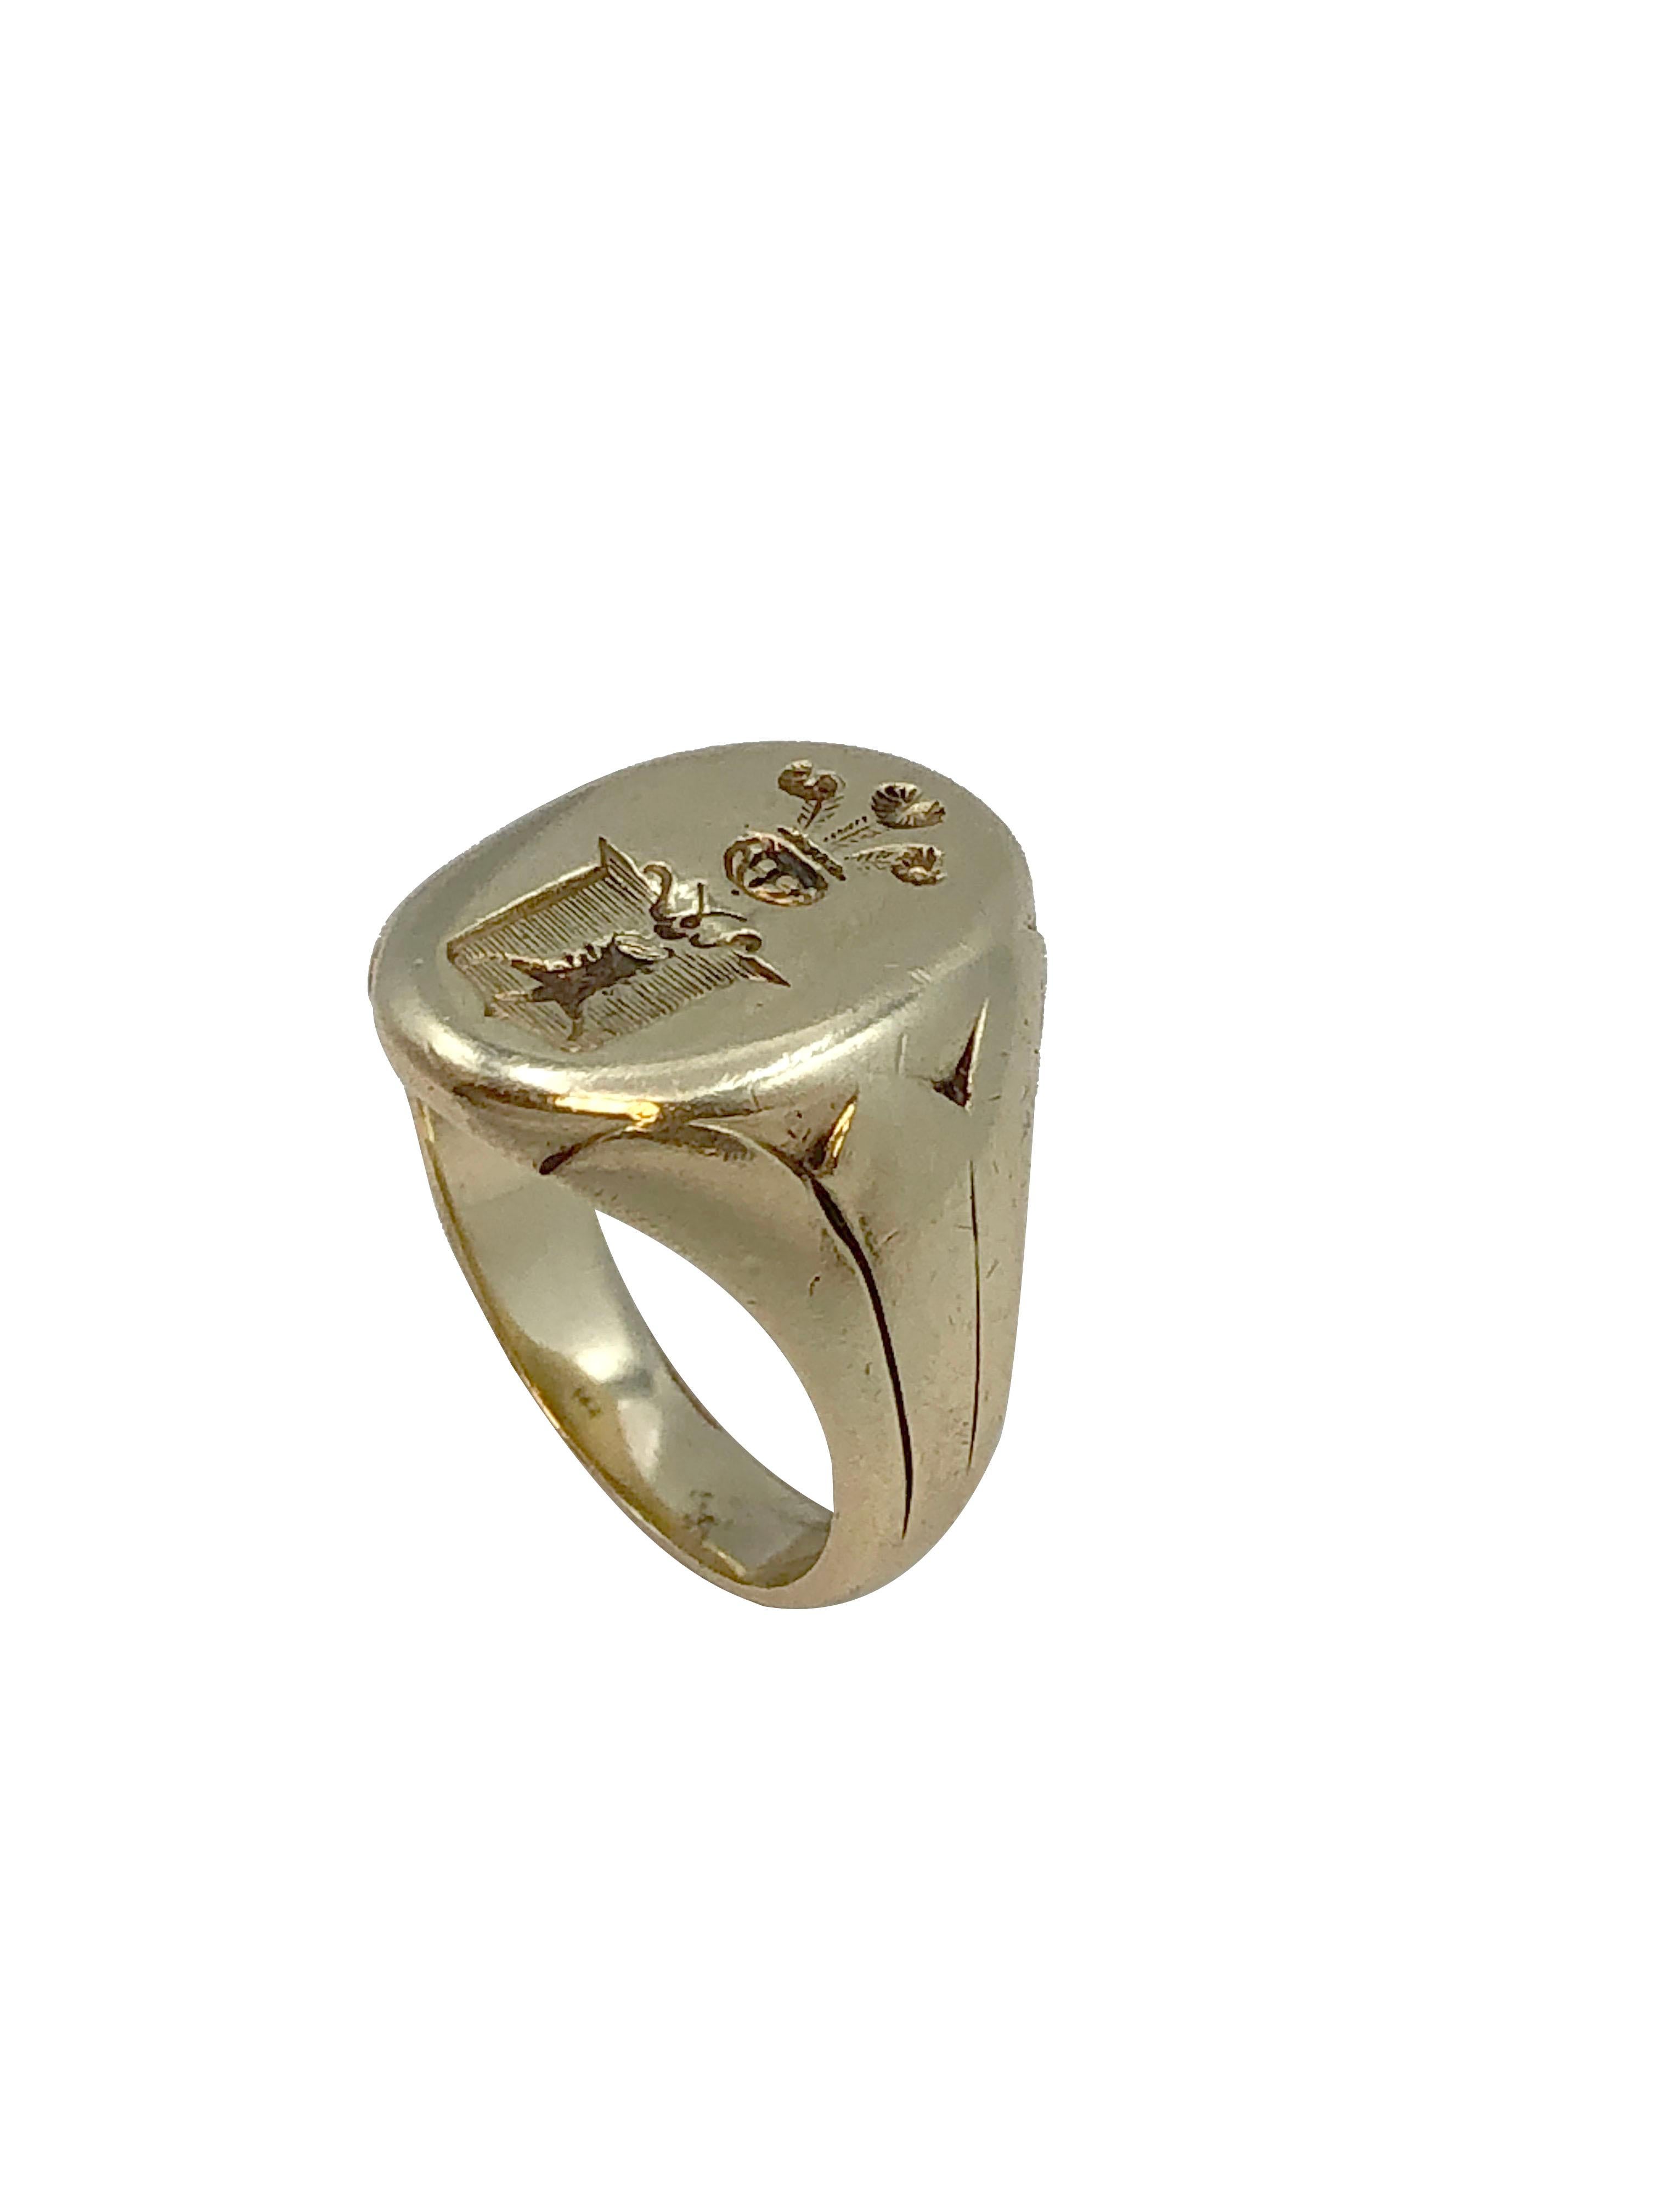 Circa 1920 - 1940 14k Yellow Gold Signet ring, the top of the ring measures 5/8 X 1/2 inch and has a deep carved Intaglio signet / Crest. The ring weighs 12.8 Grams and is a finger size 7. 